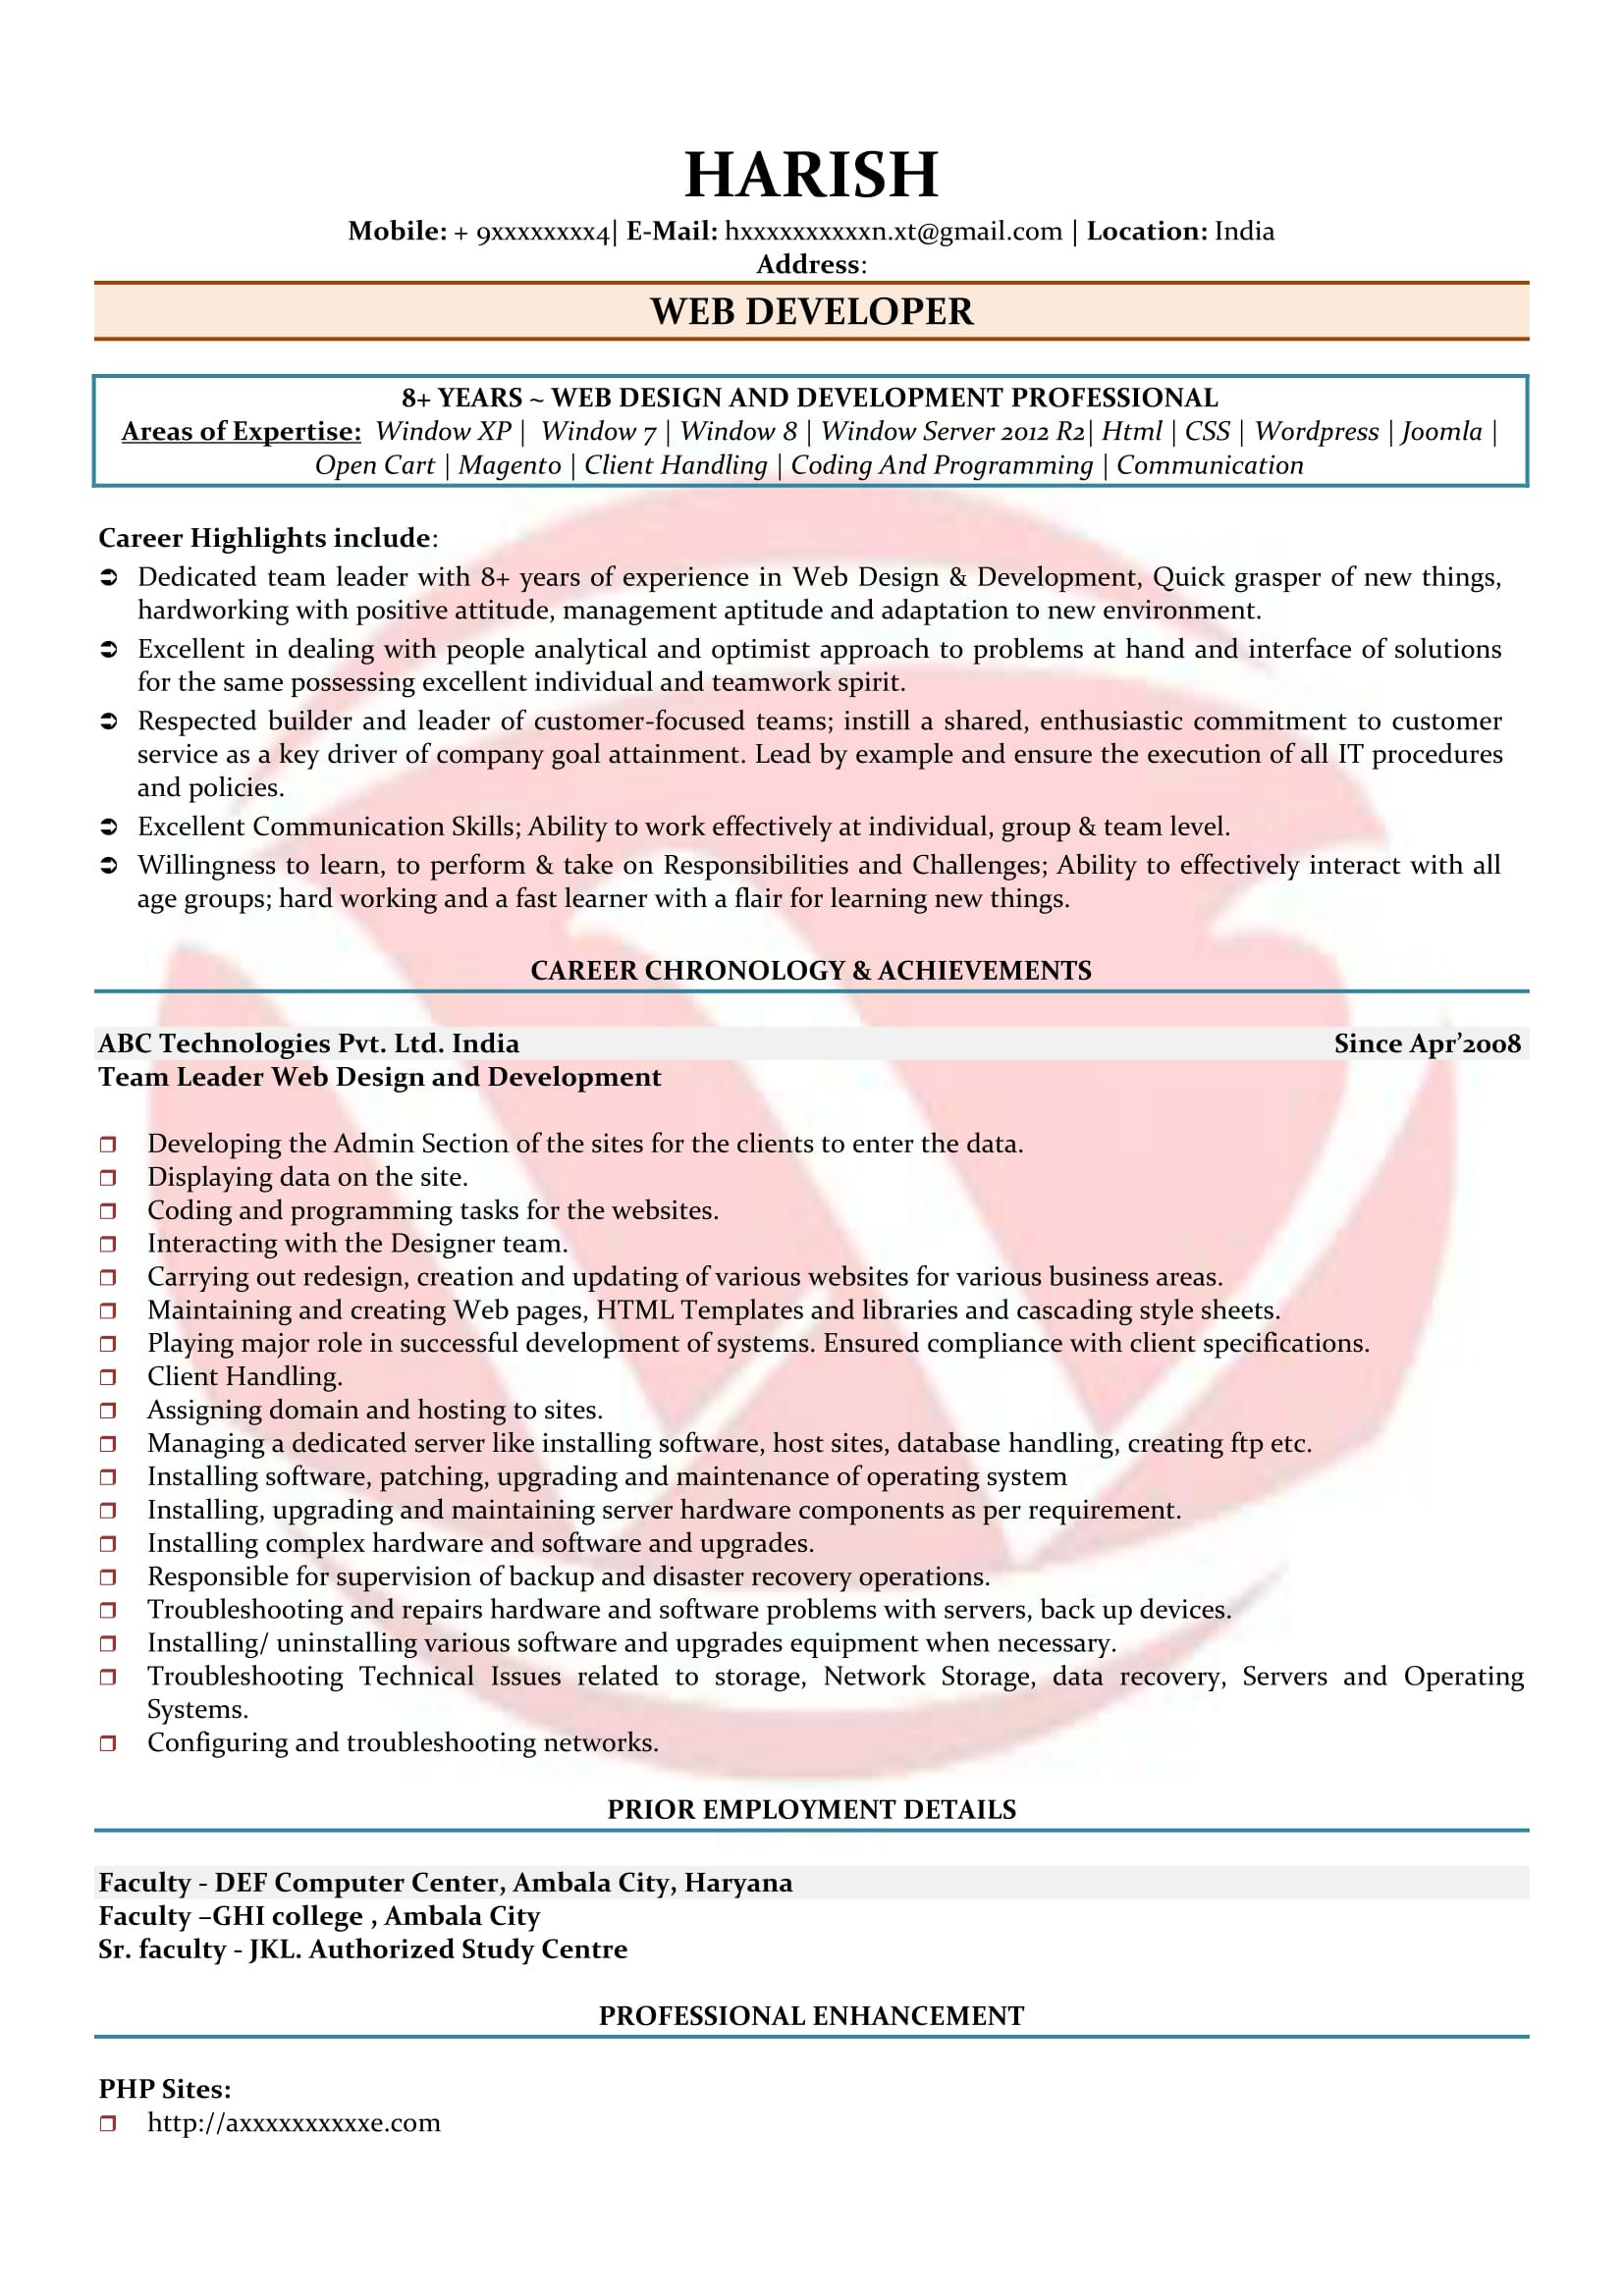 Net Developer with Health Care Domain Sample Resume Web Developer Sample Resumes, Download Resume format Templates!